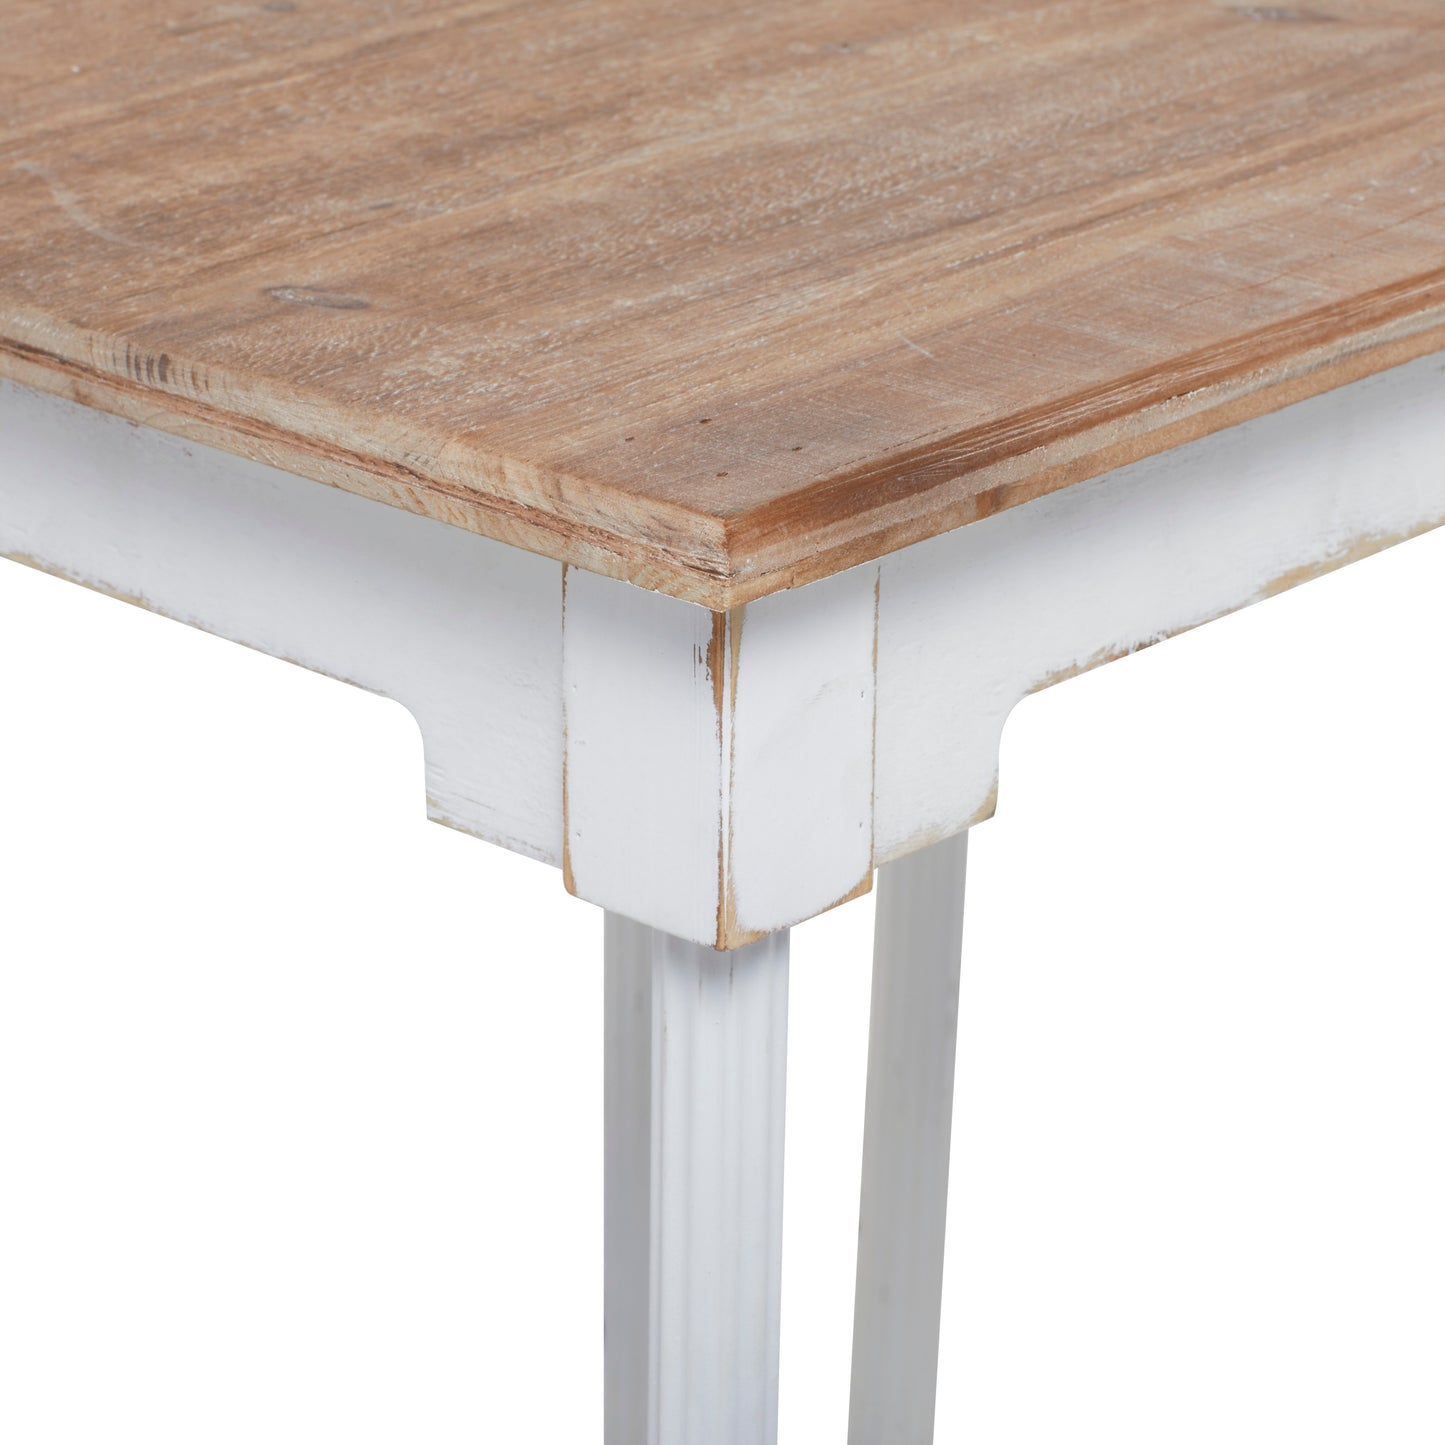 Table Stand Distressed Farmhouse Wood White & Natural 29"h